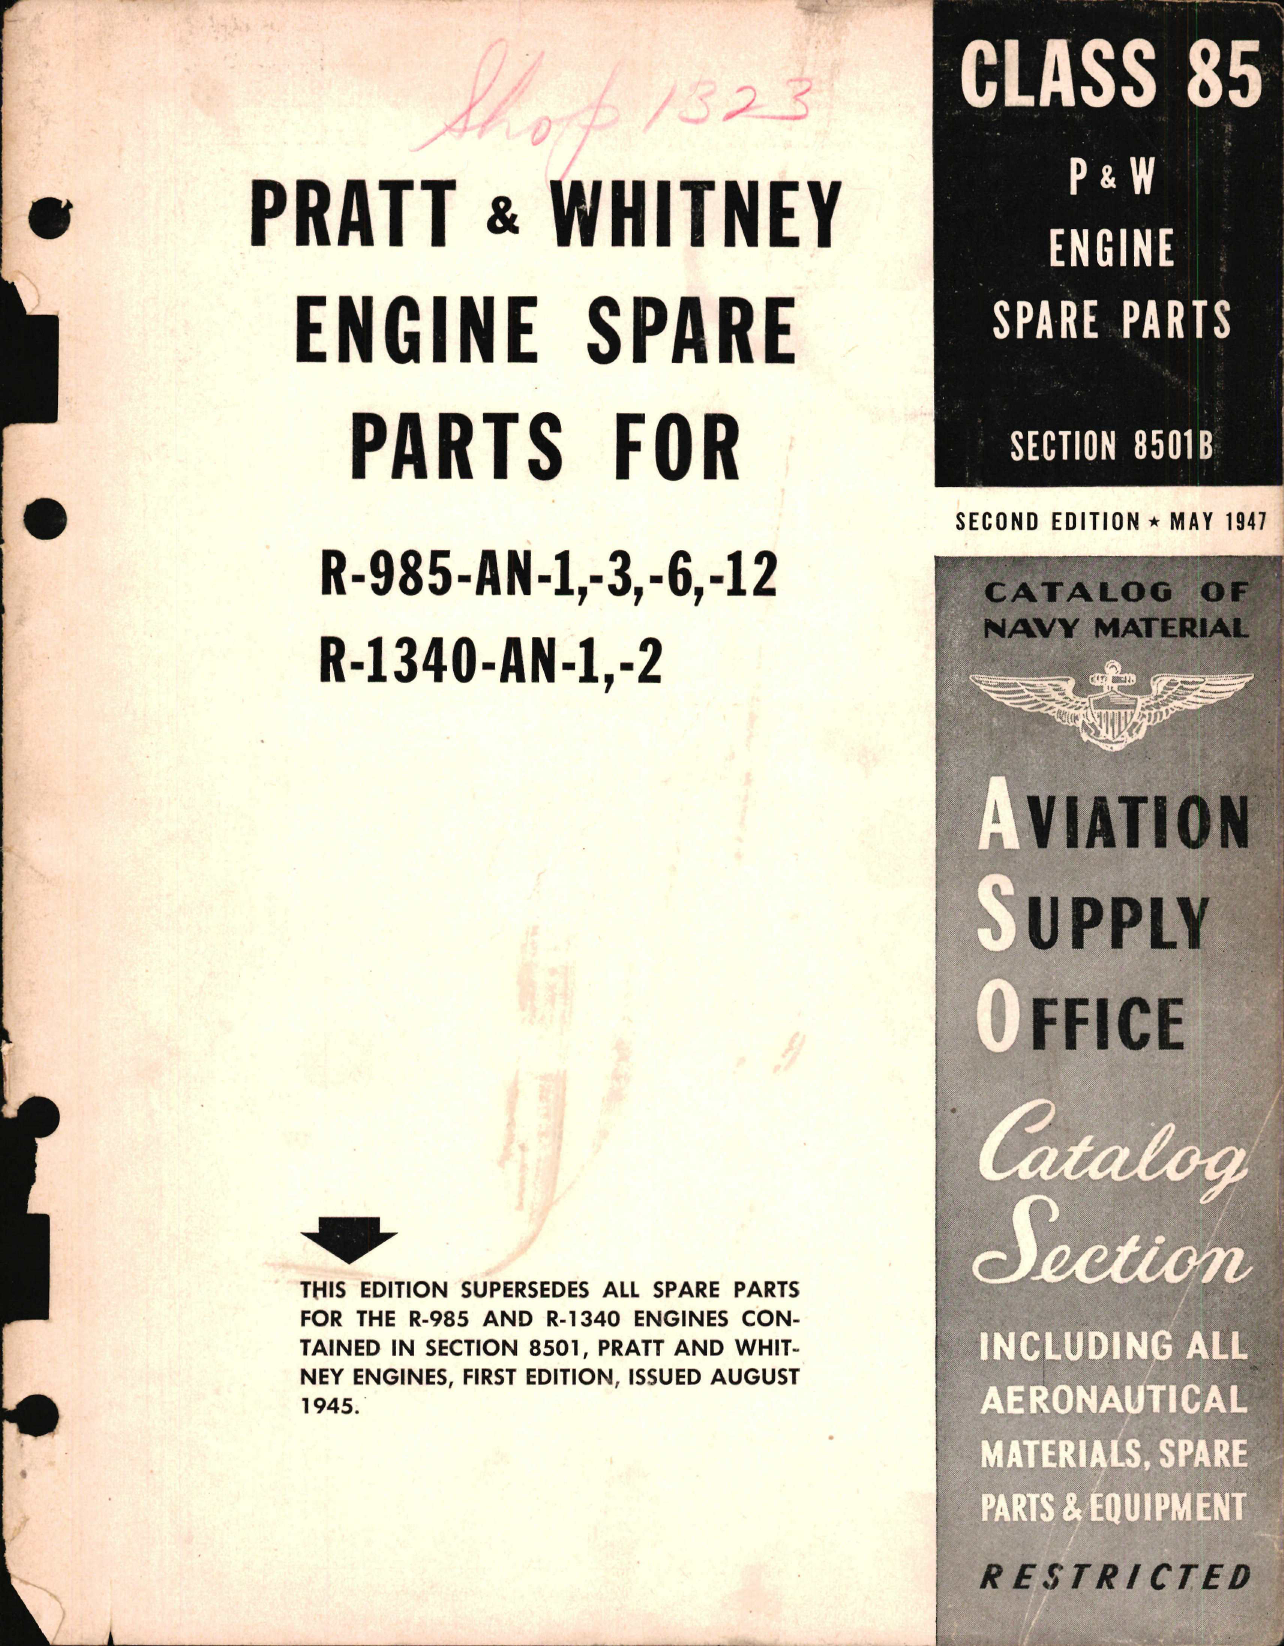 Sample page 1 from AirCorps Library document: Pratt & Whitney Spare Parts for Pratt & Whitney Engines R985-AN-1, -3, -6, -12, R-1340-AN-1, and -2